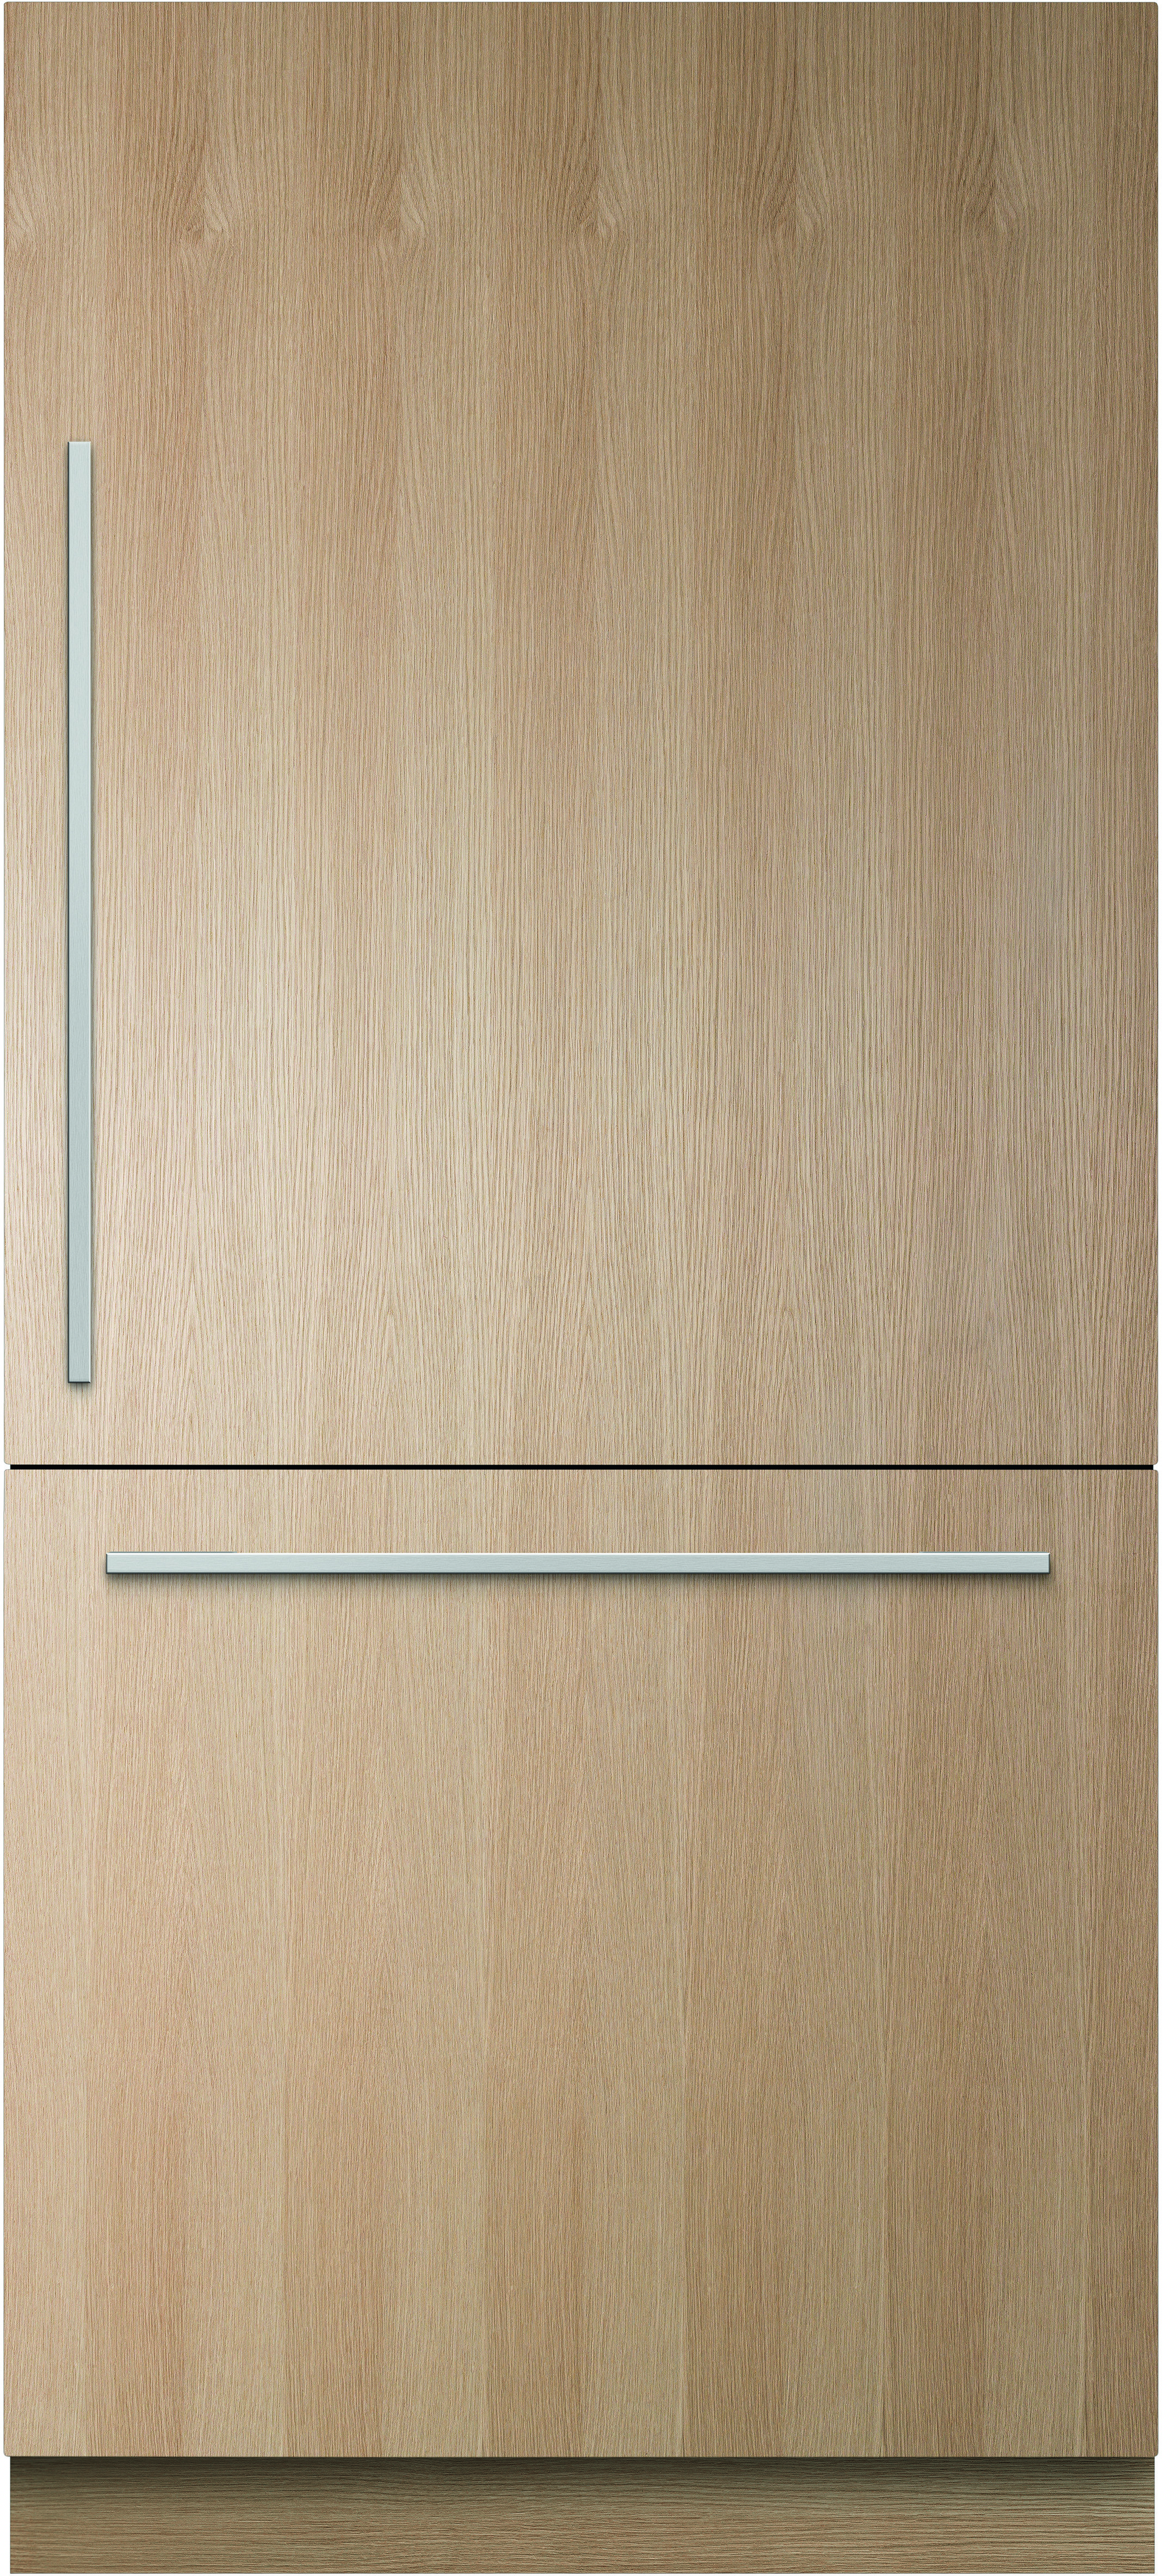 Fisher & Paykel 36 Inch & Paykel Active Smart 36 Built In Counter Depth Bottom Freezer Refrigerator RS36W80RJ1N